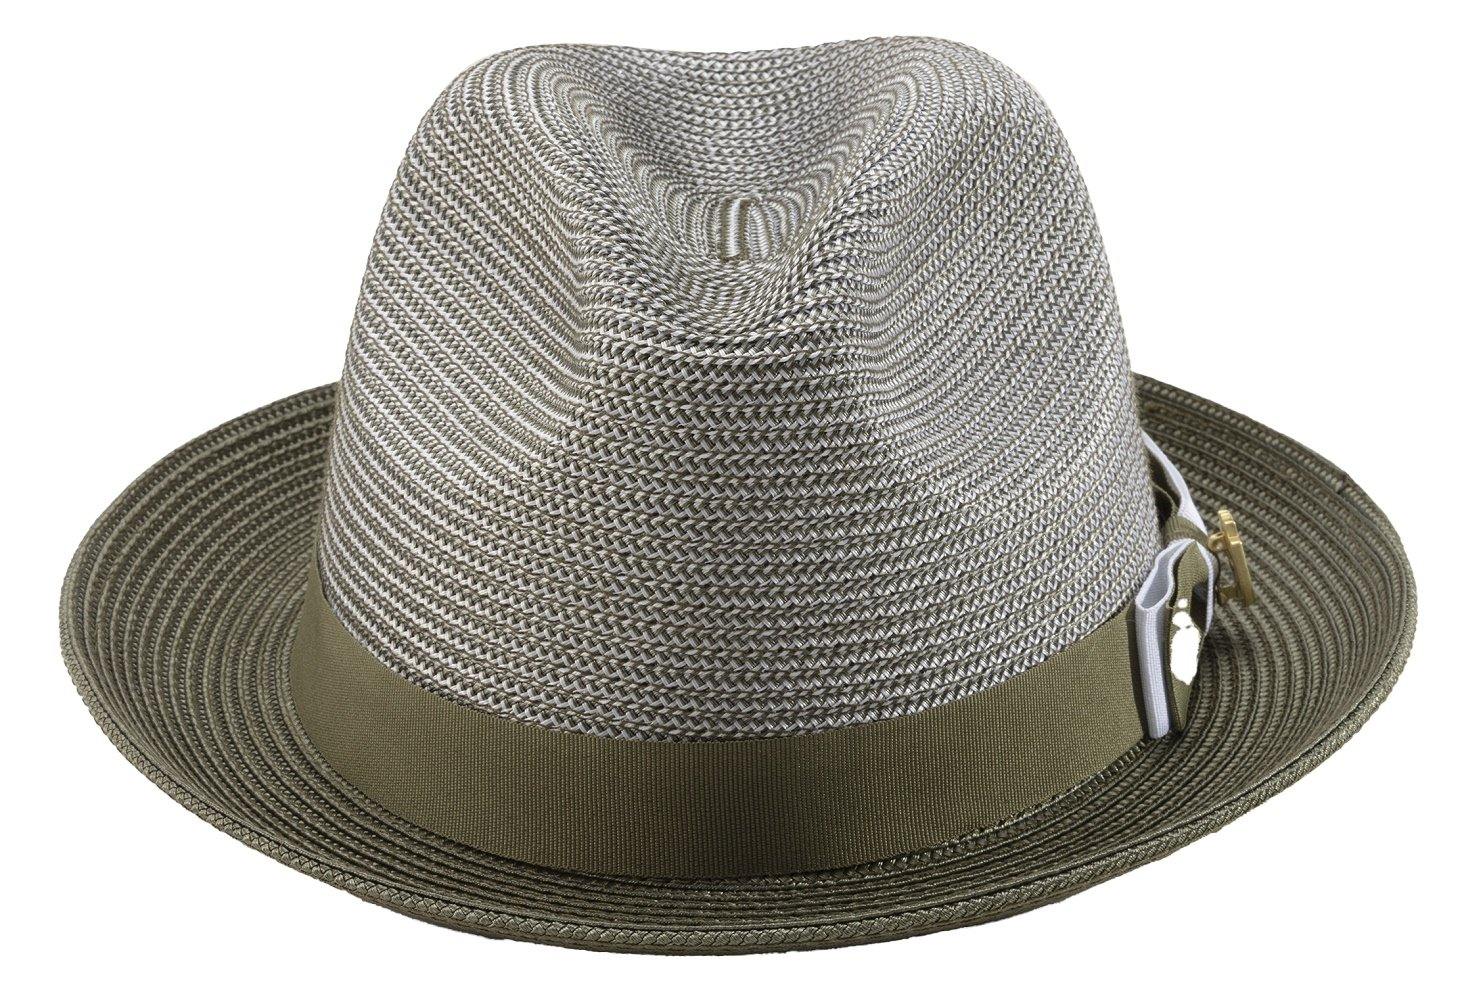 Men's Braided Two Tone Stingy Brim Pinch Fedora Hat in Olive H-68 - Suits & More